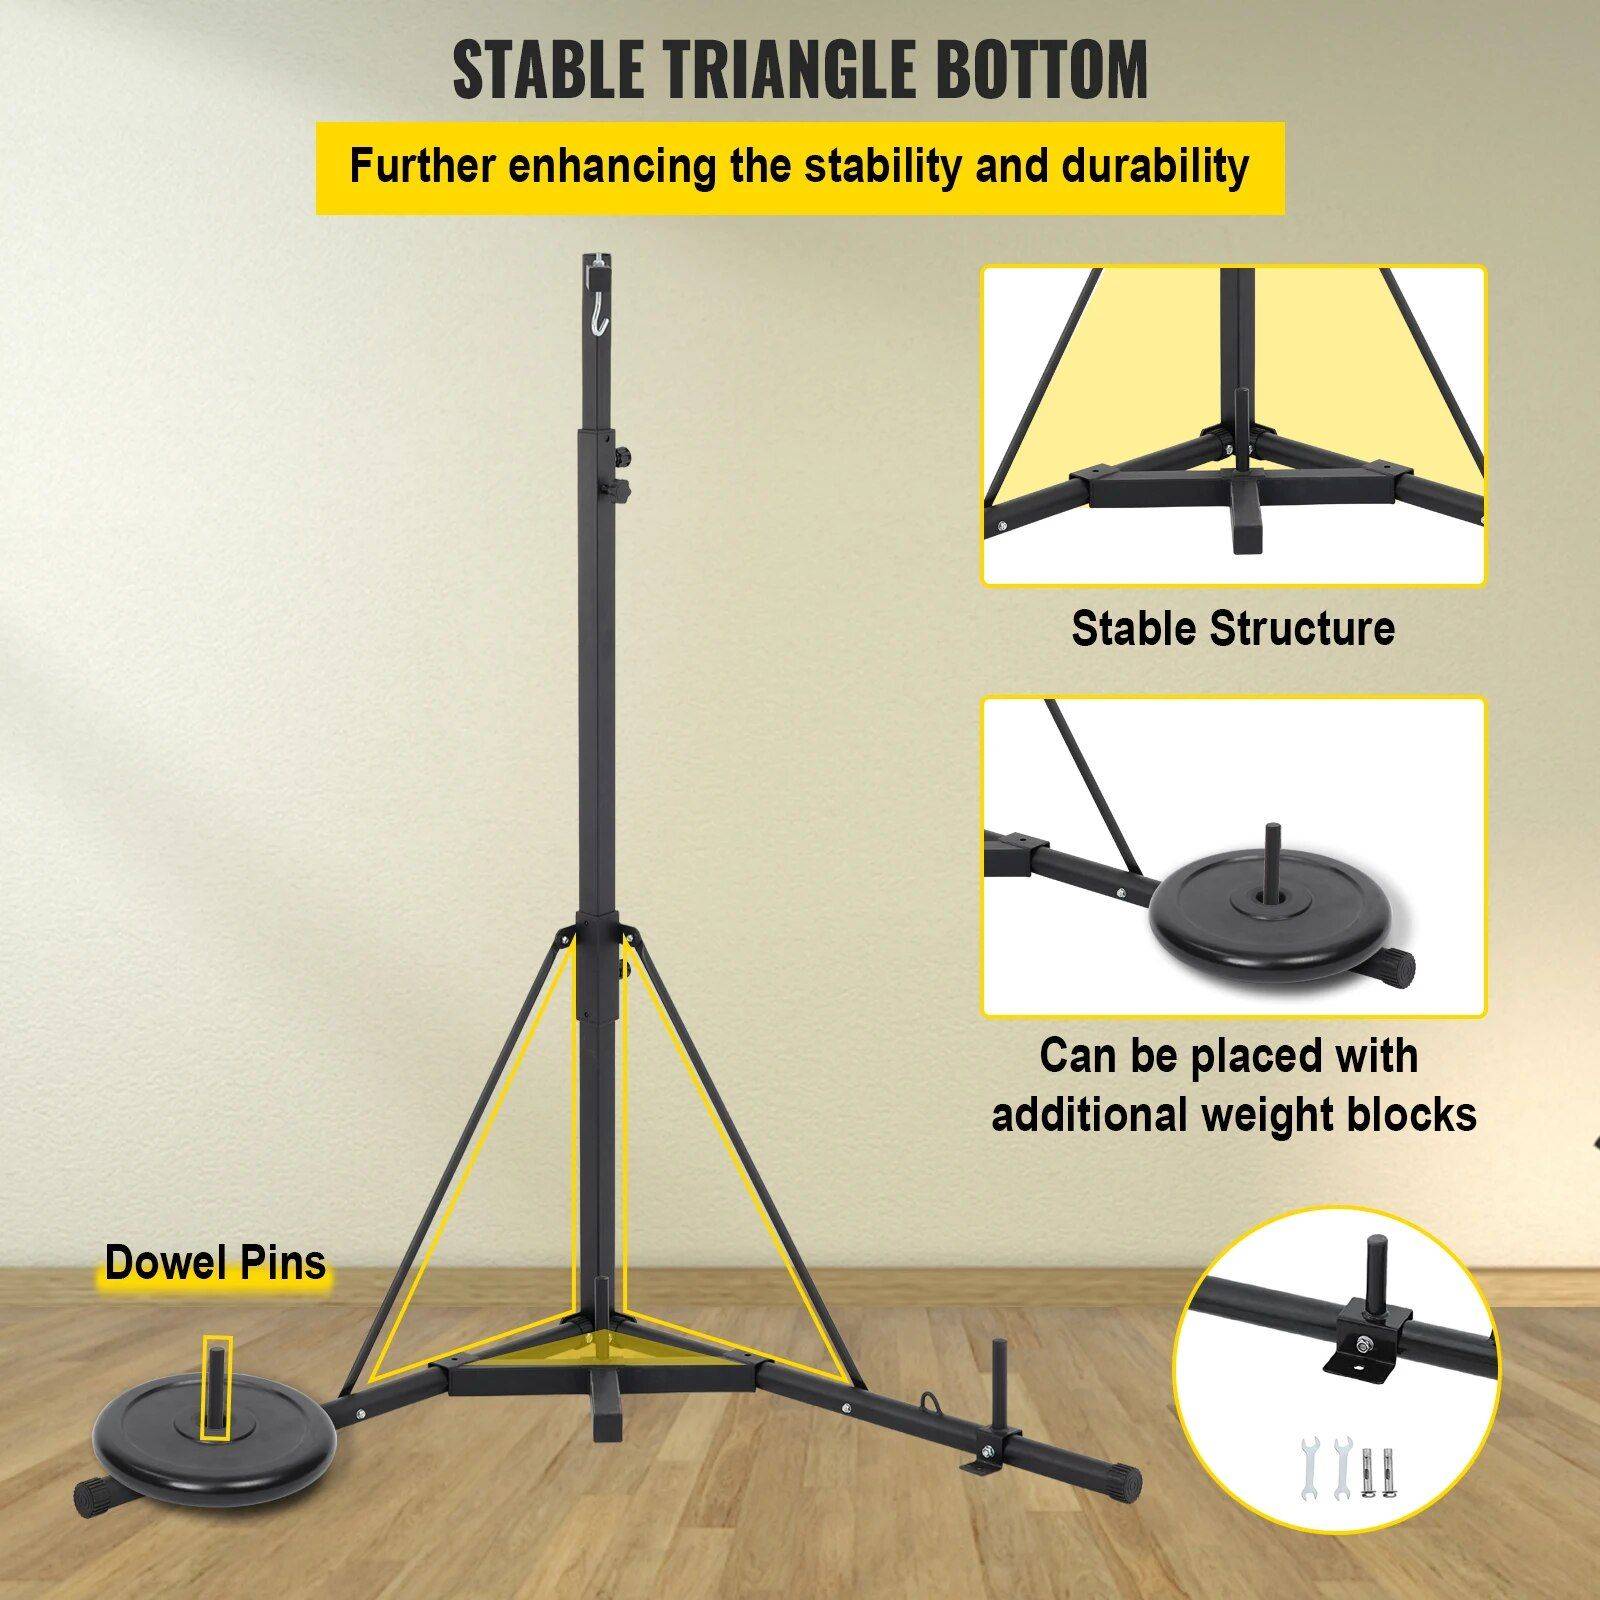 Adjustable Height Punching Bag Stand Exercise & Fitness  